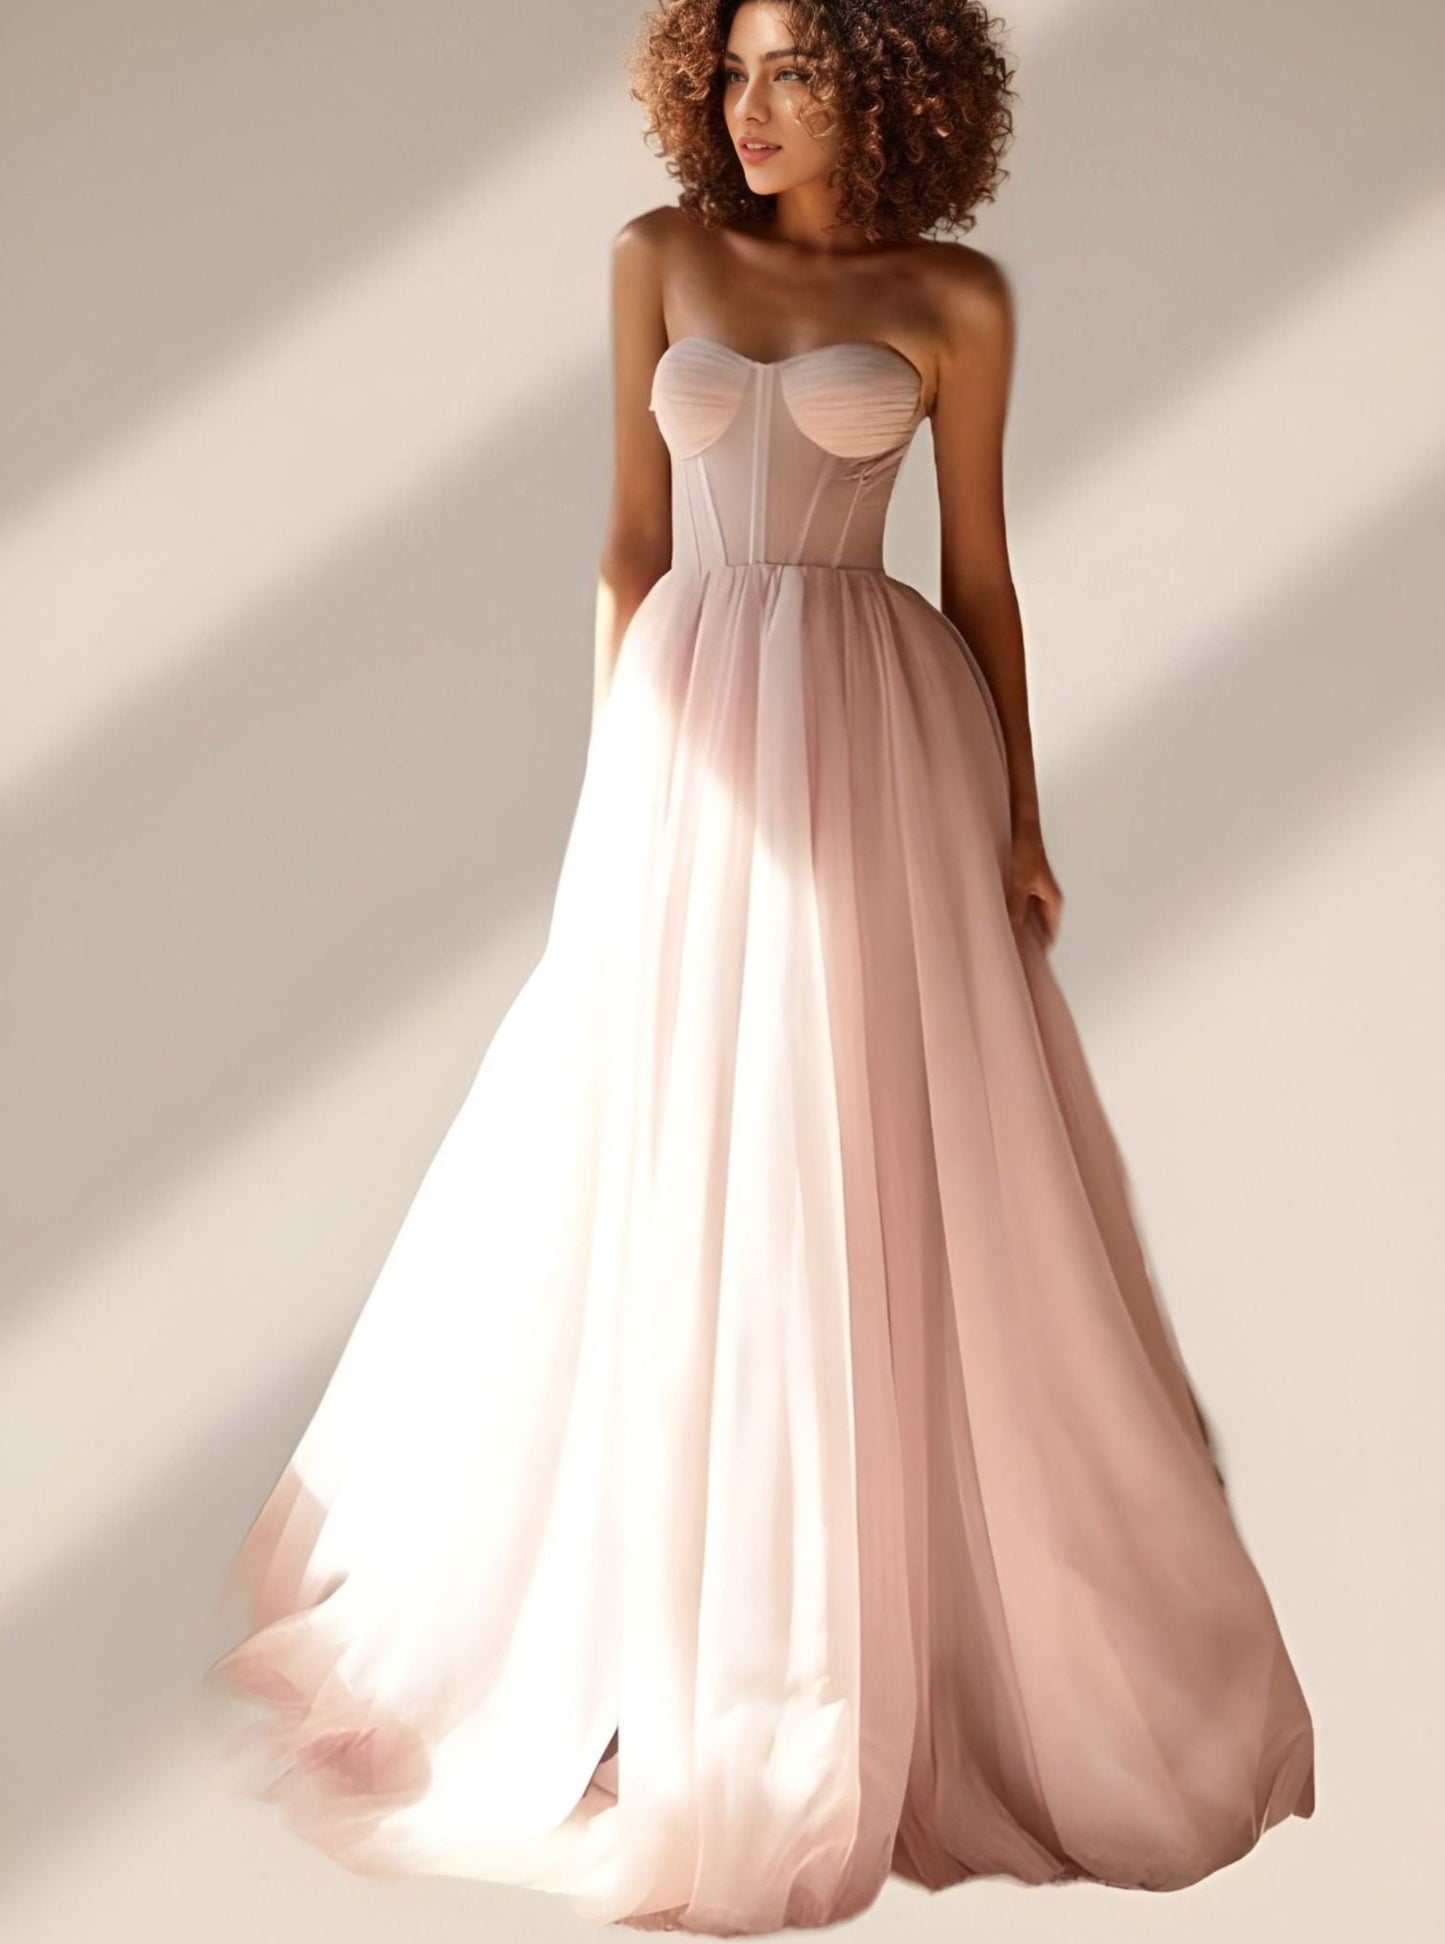 BIANCA Formal Couture Dress